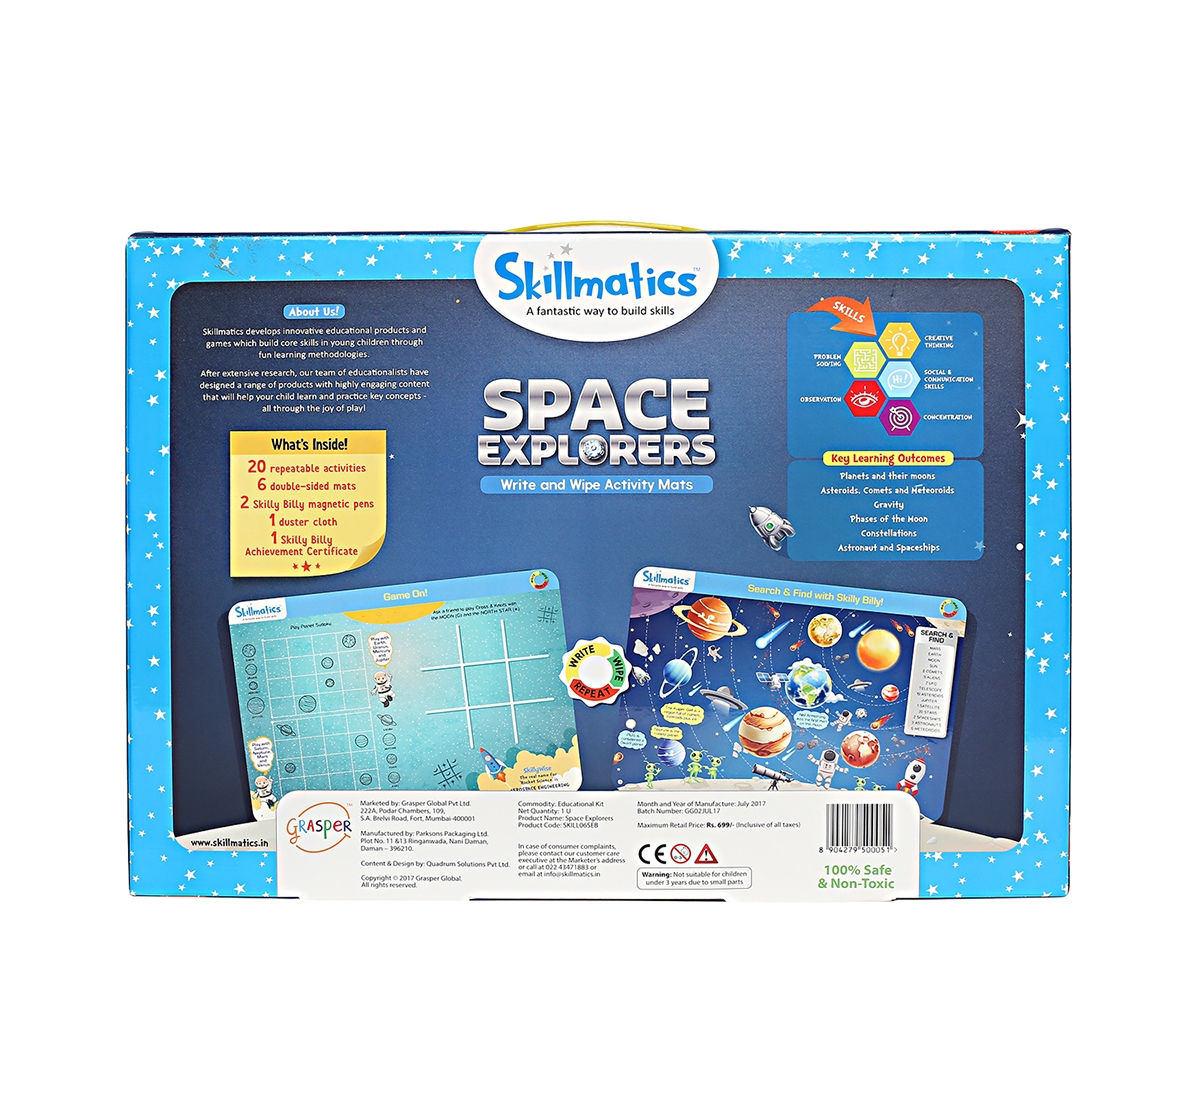 Skillmatics |  Skillmatics Educational Game Space Explorers 6-9 Years, Multi Color Games for Kids age 6Y+  2